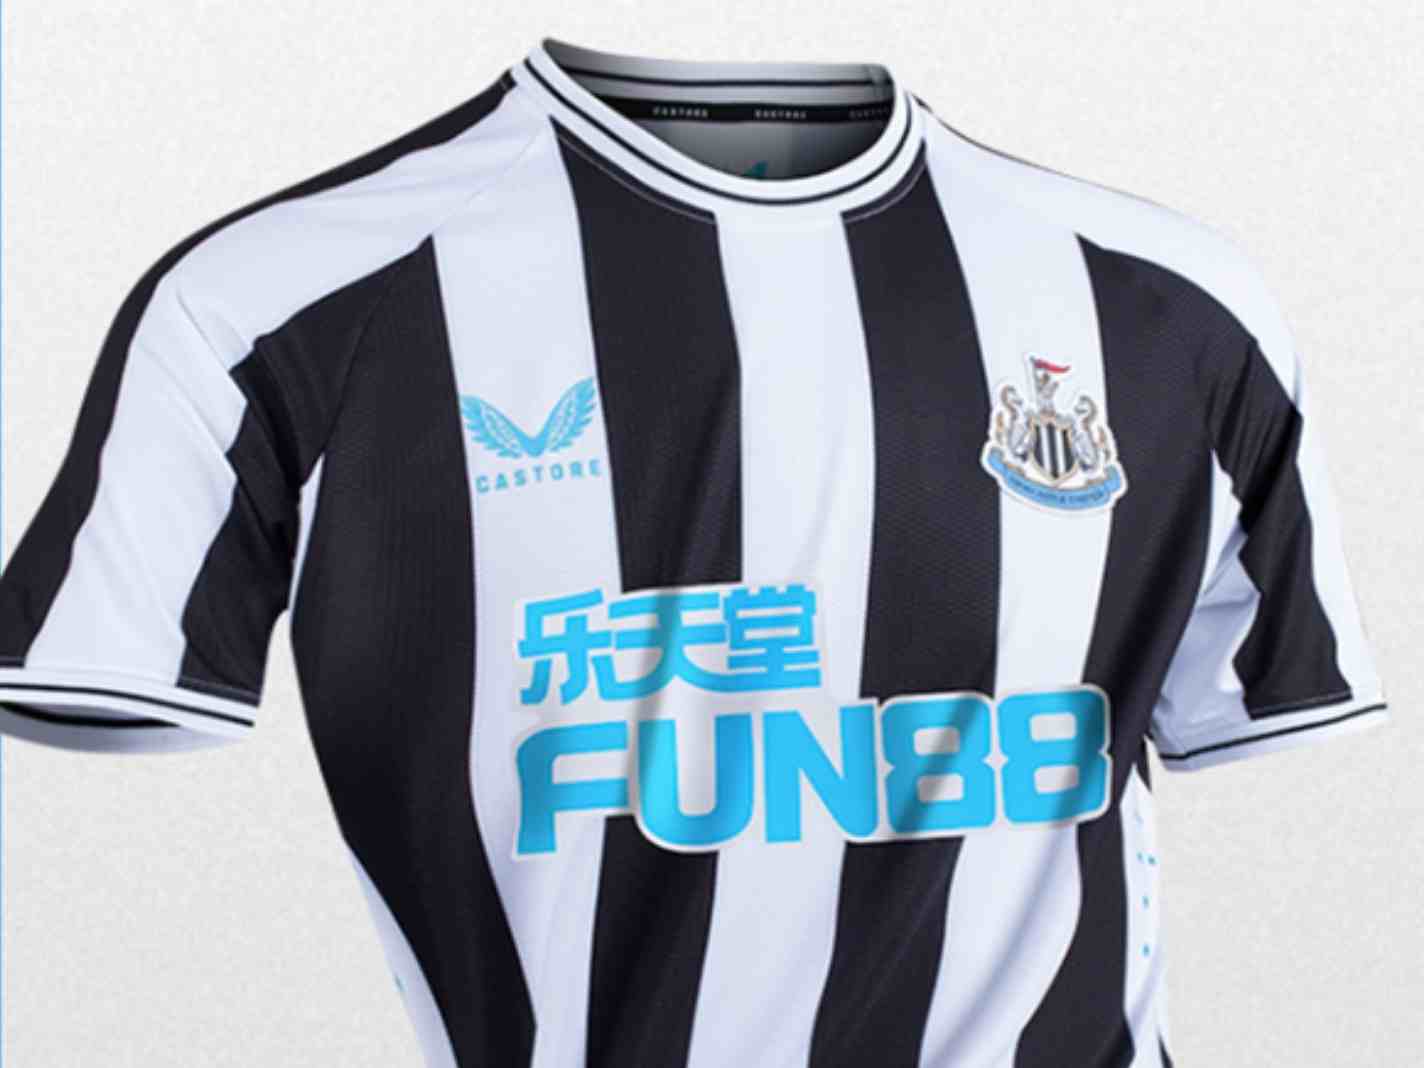 Newcastle Buries all Rumours of Ditching Fun88 with New Kit Launch